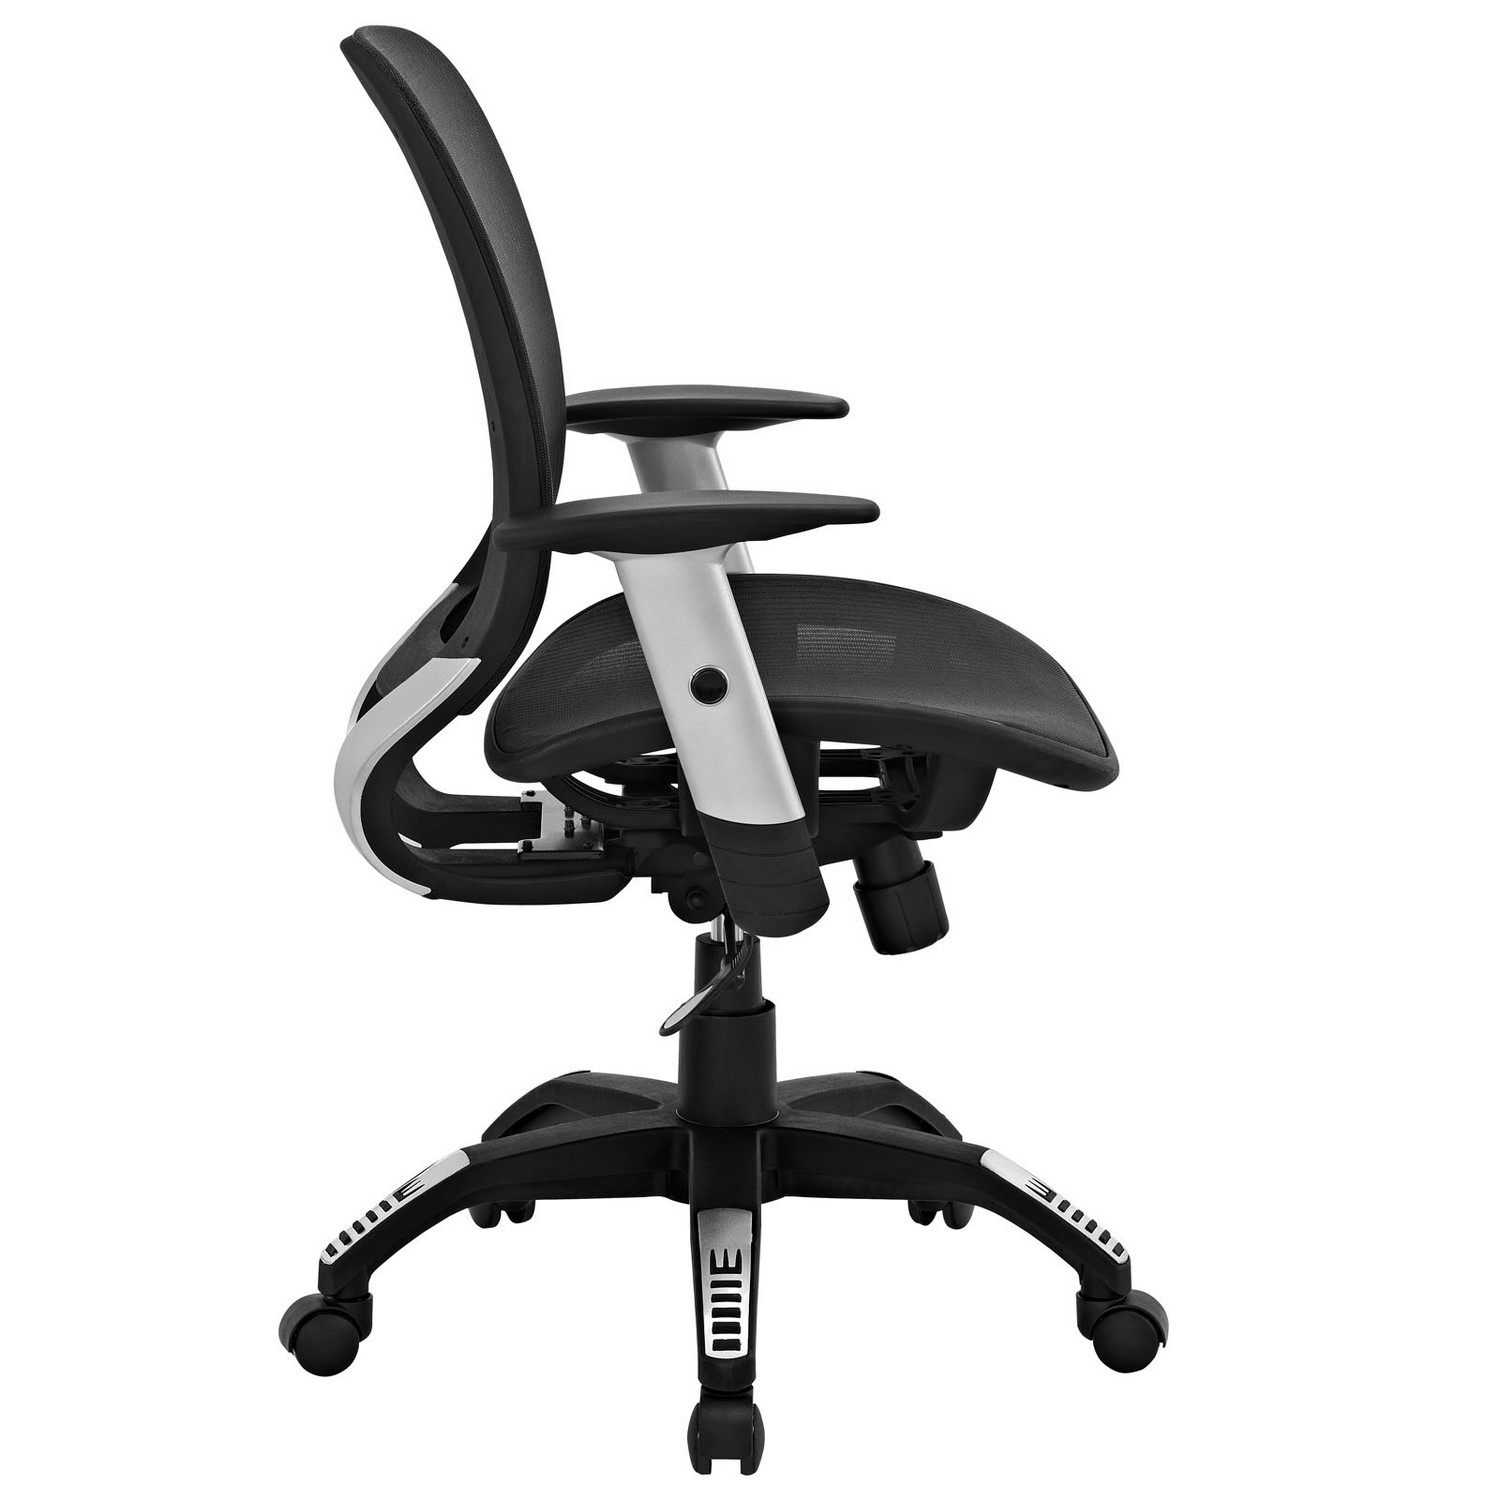 Modway Arillus All Mesh Office Chair - Black